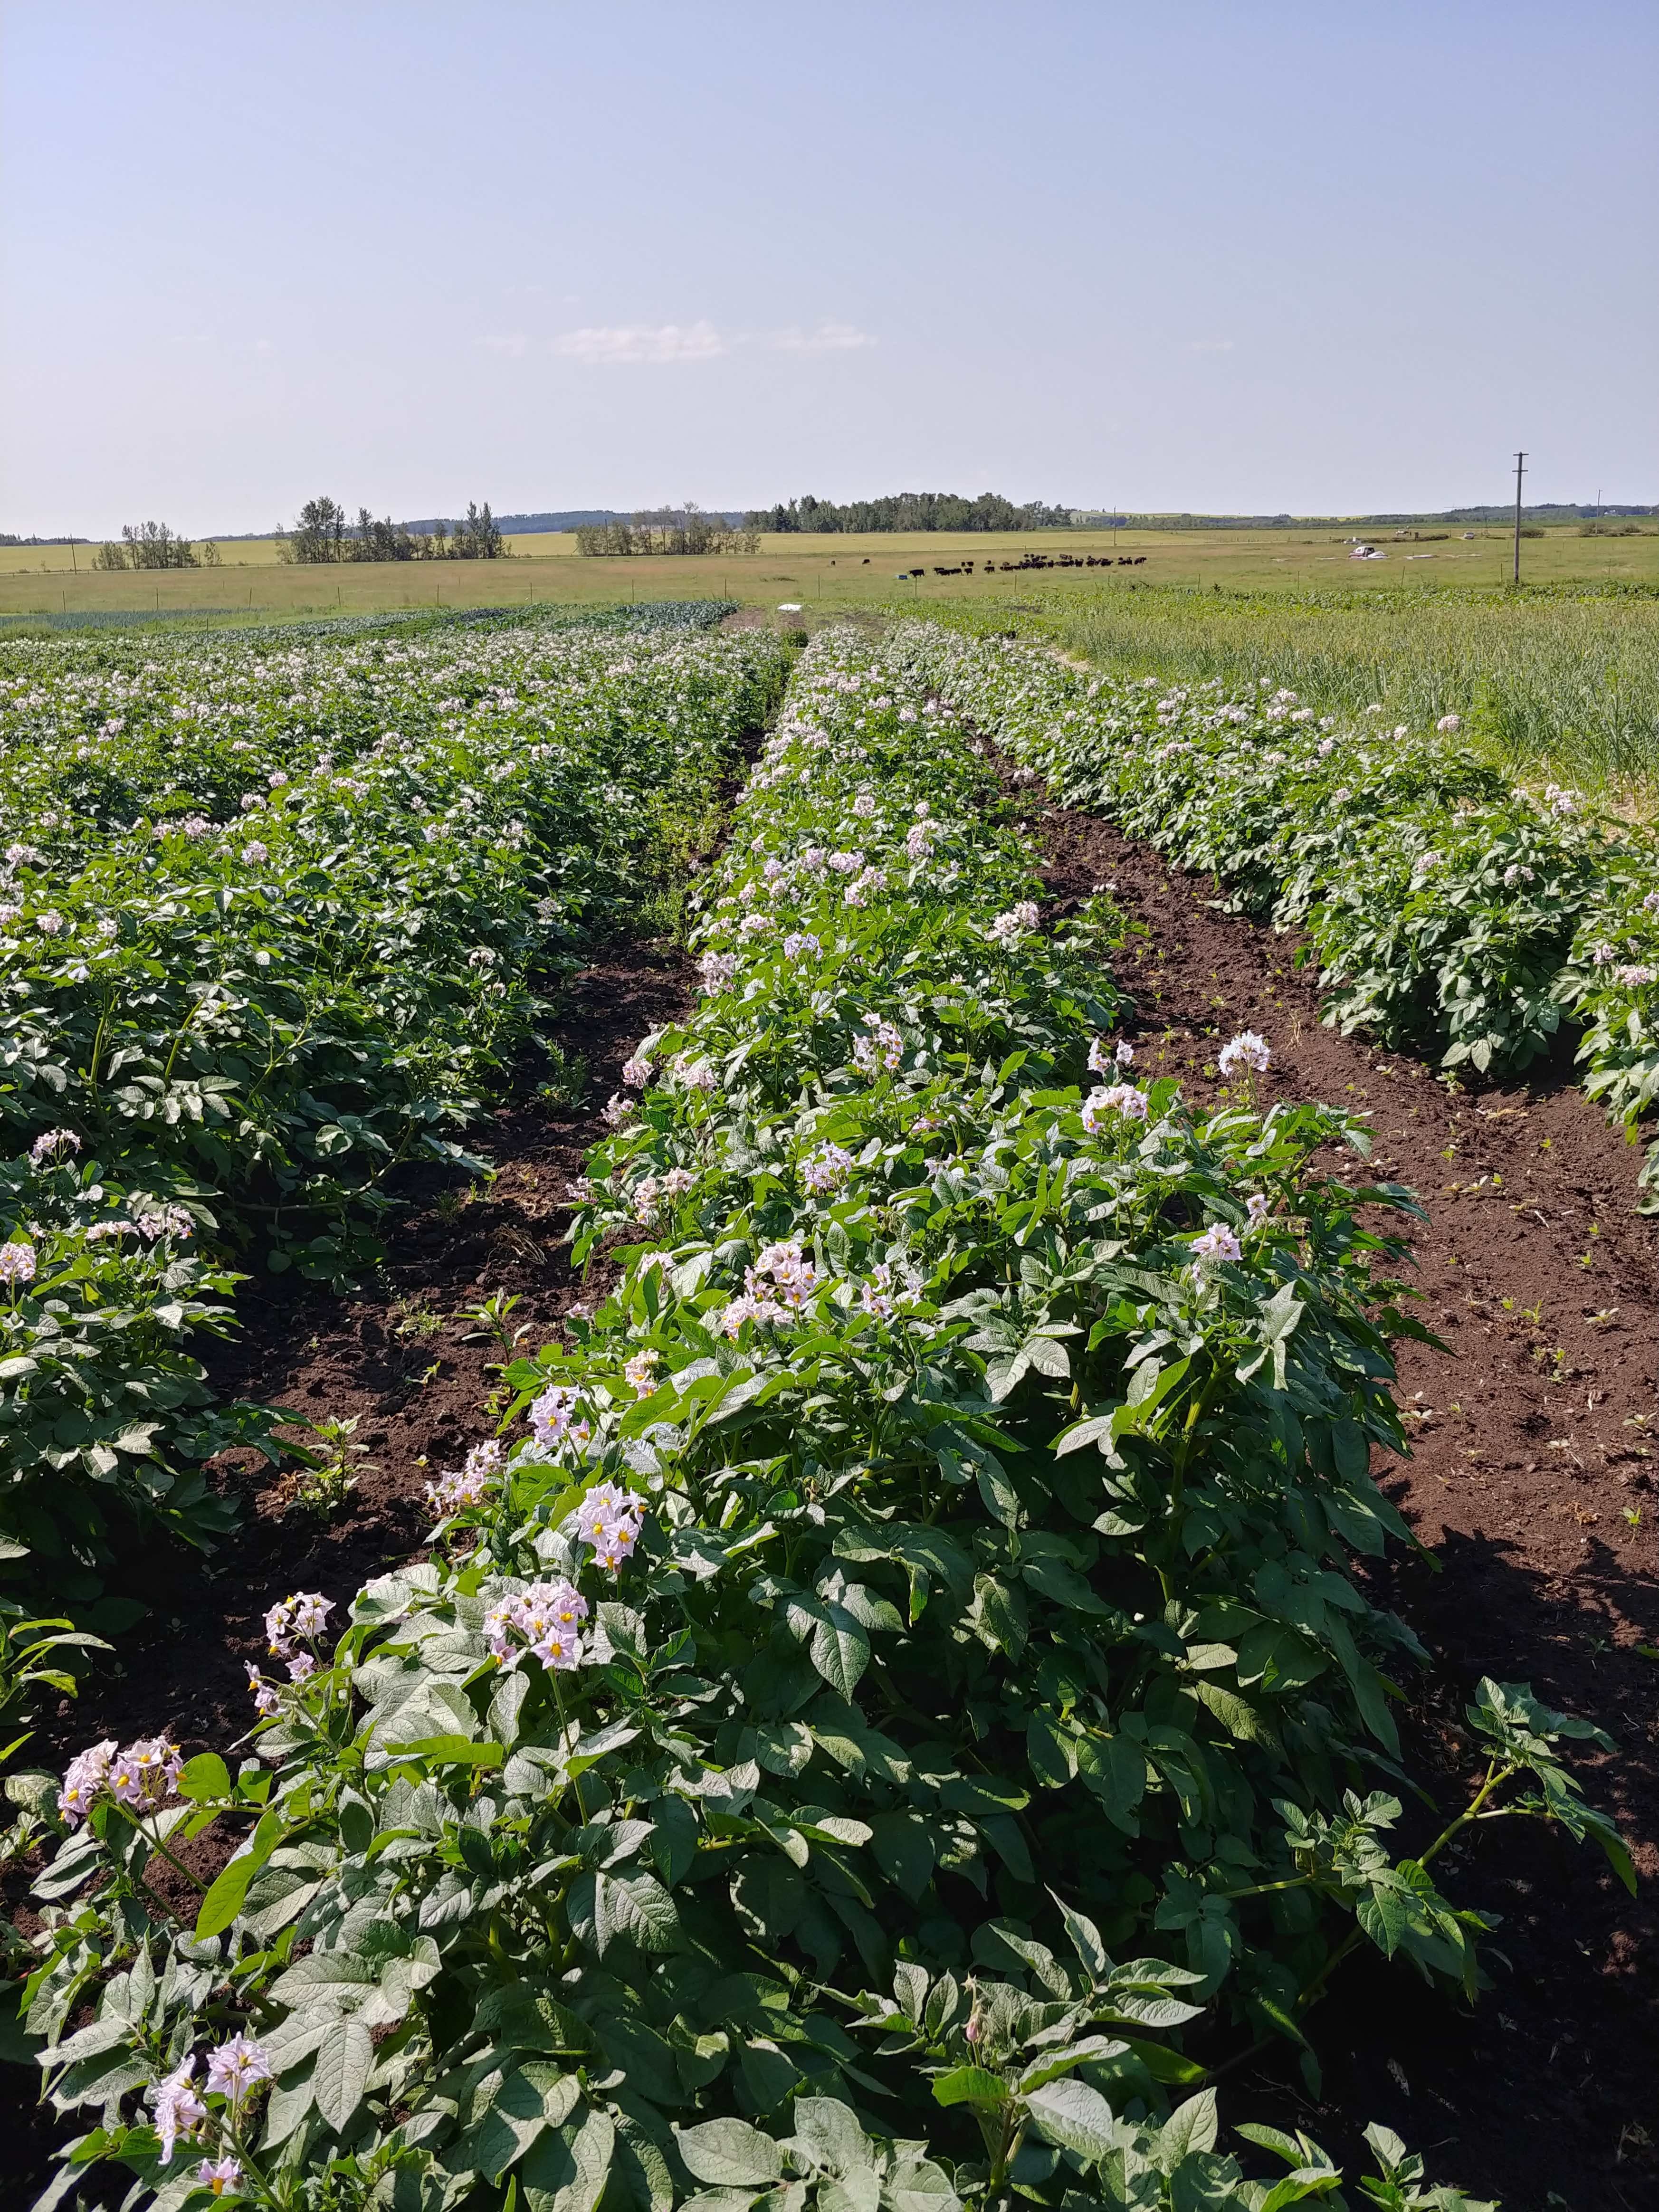 Farm Happenings for August 6, 2019 - Potatoes and Beef